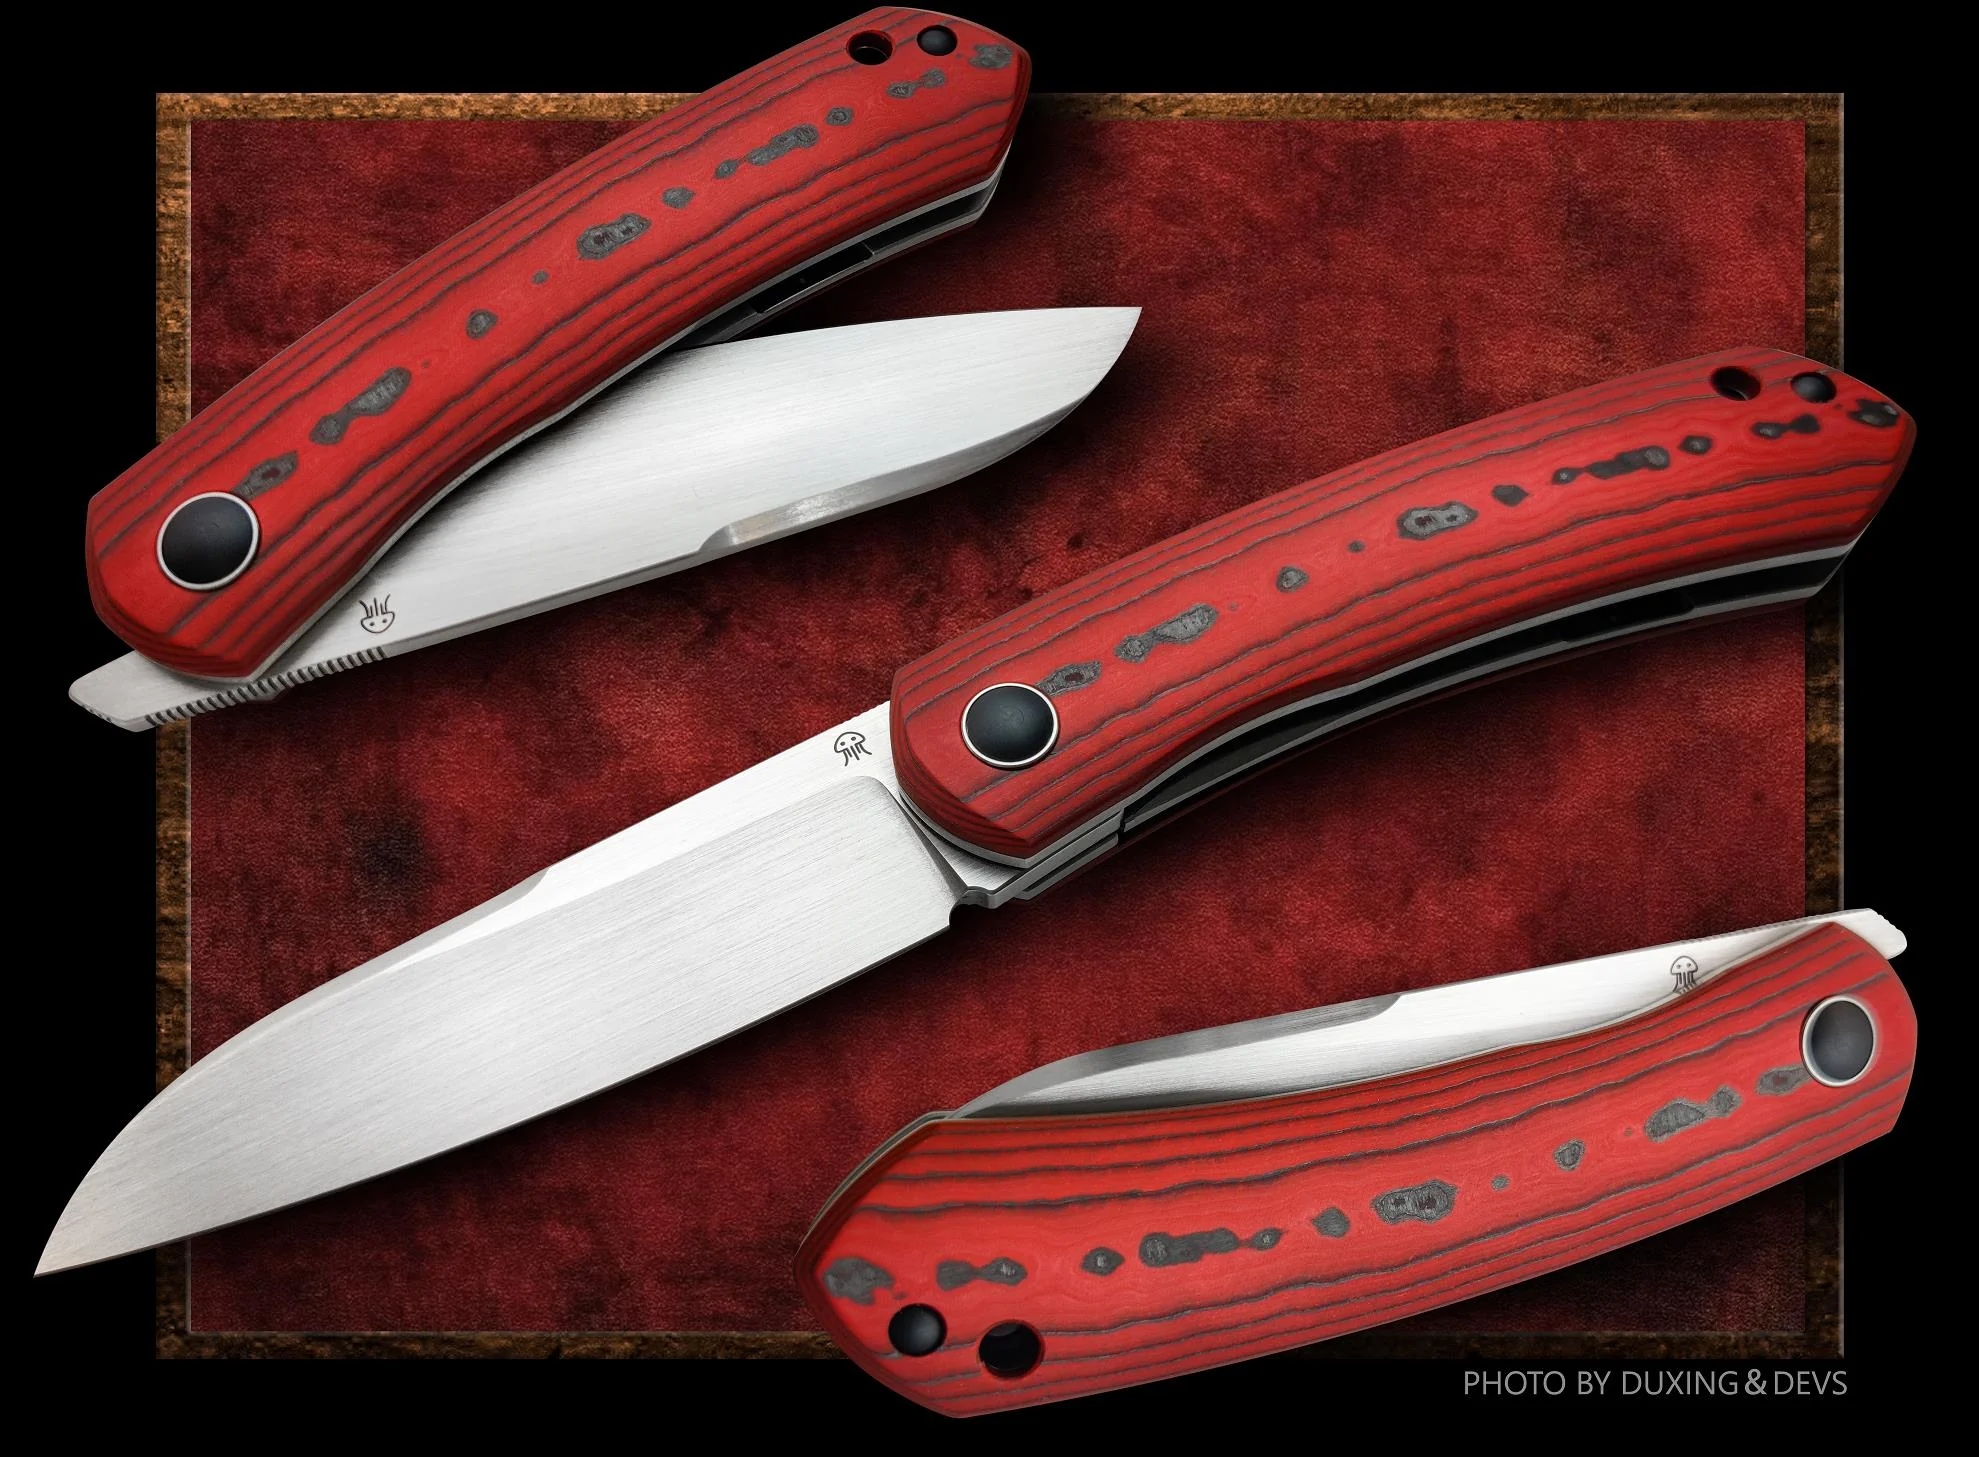 North Mountain Knives